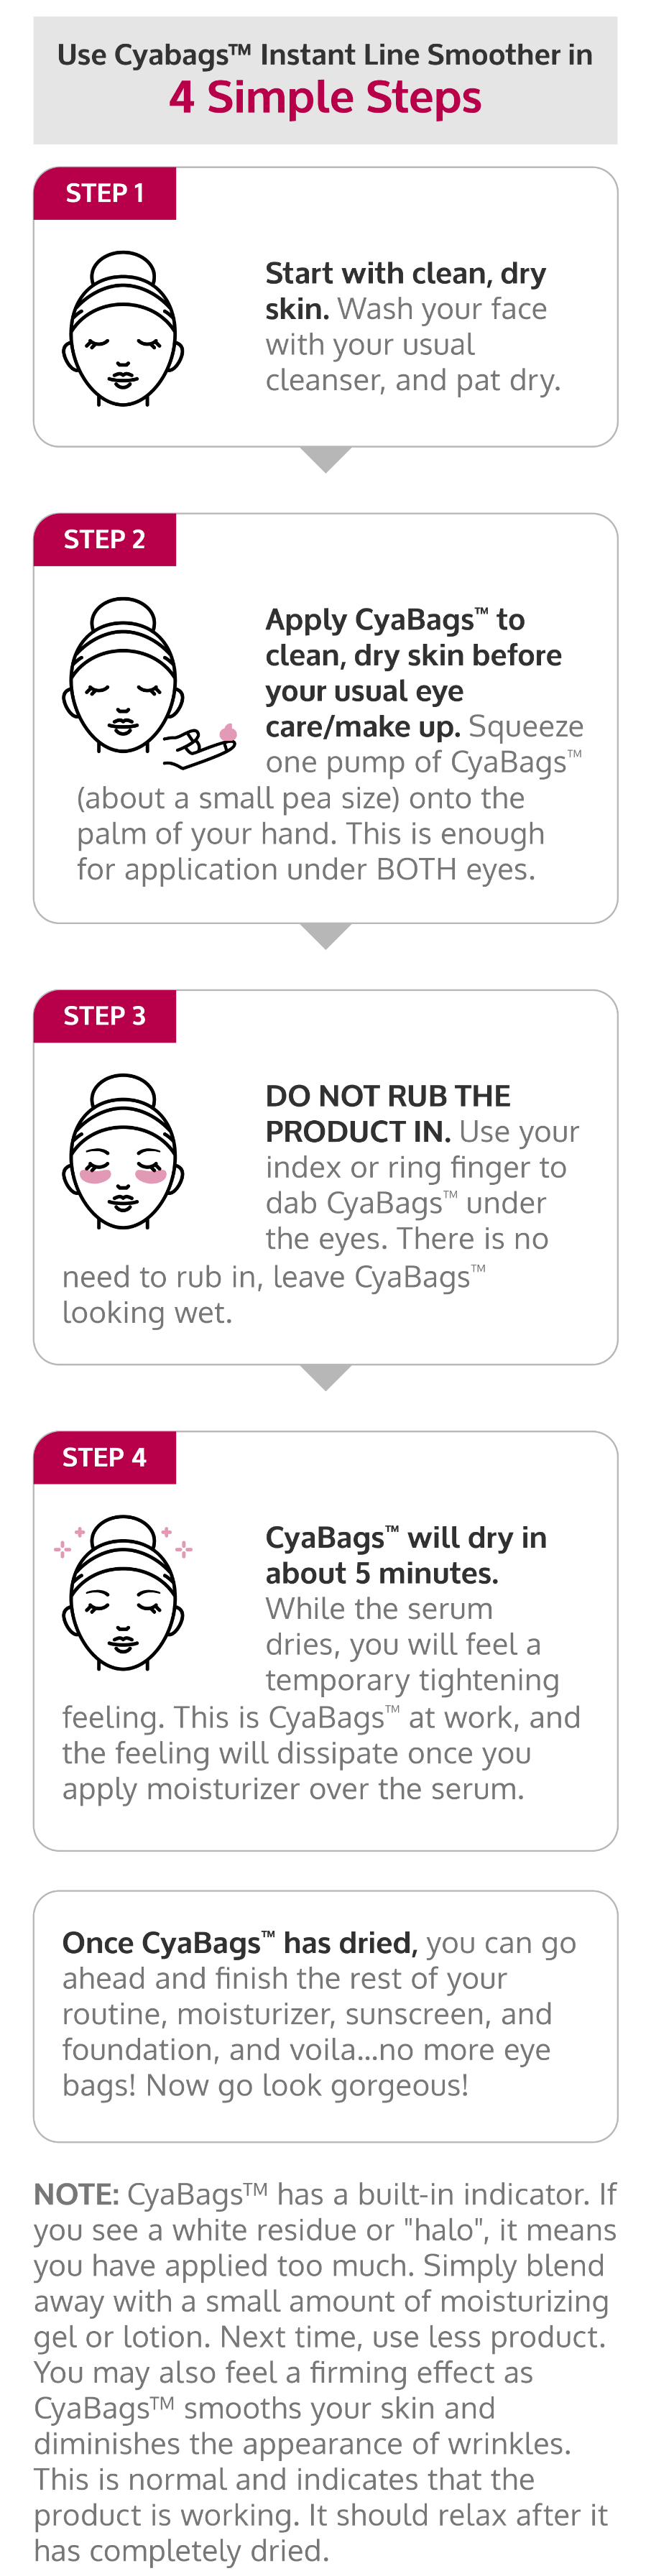 How to apply Cyabags